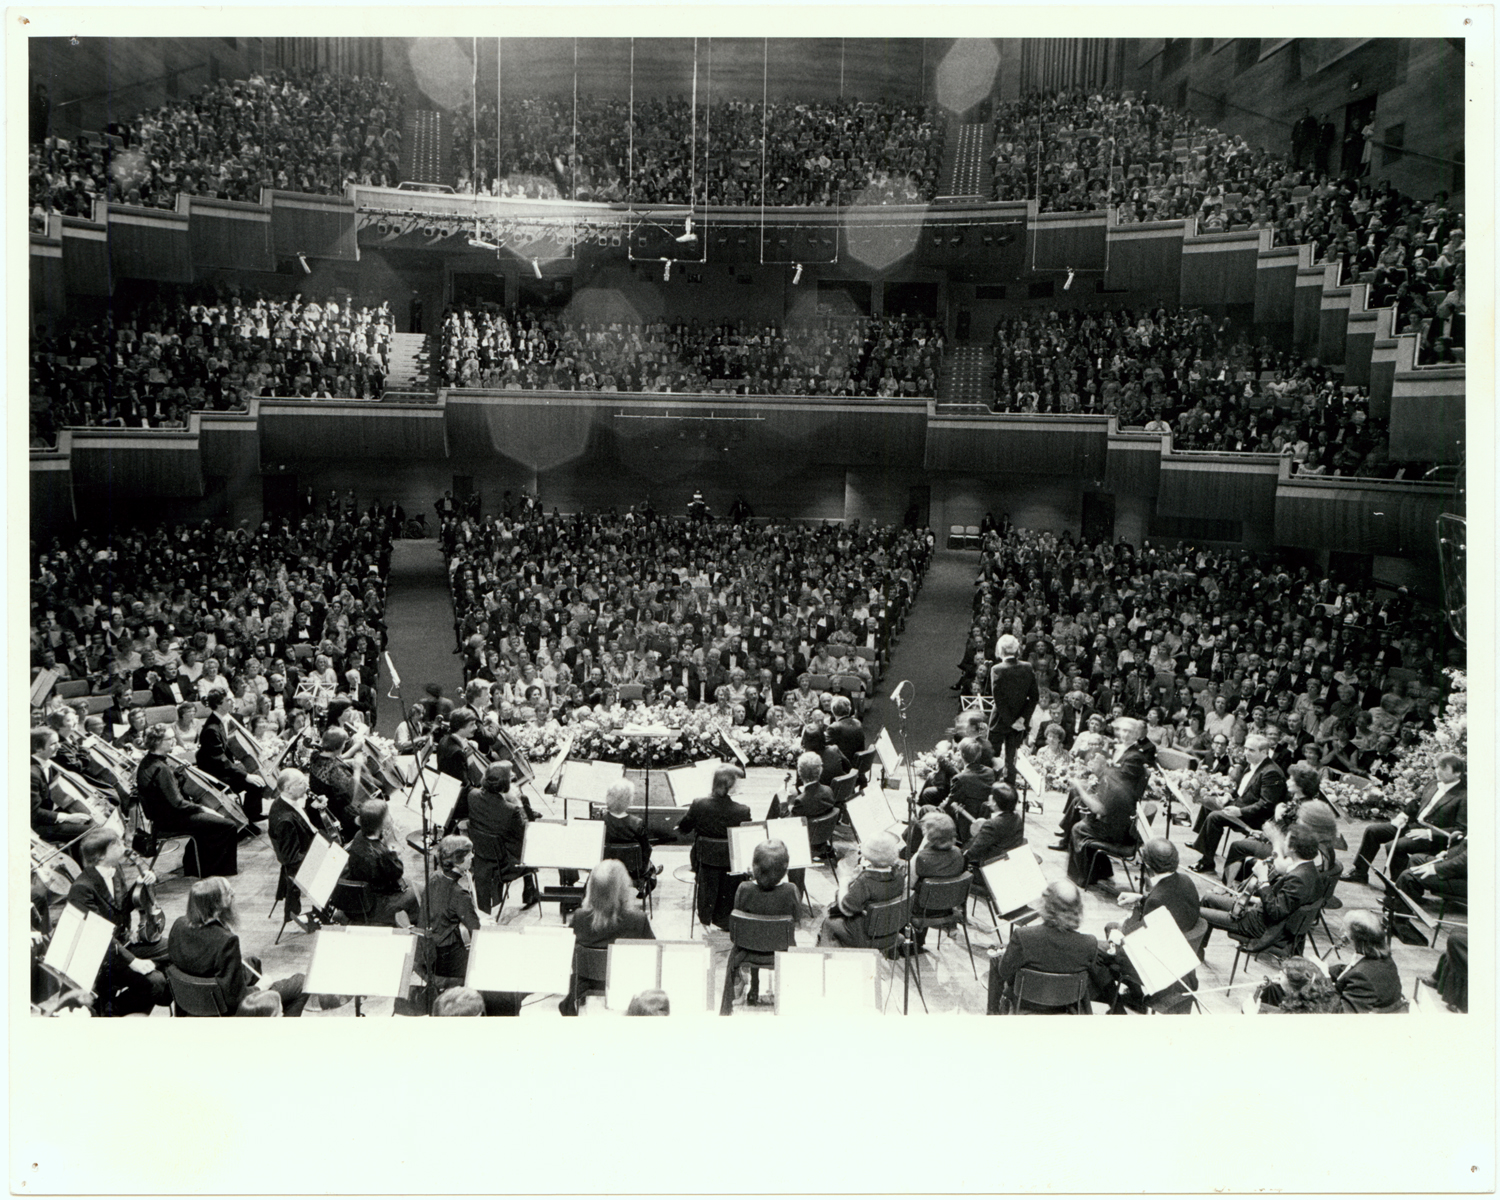 Melbourne Symphony Orchestra on stage at the opening night of Hamer Hall (Melbourne Photograph, black and Concert Hall), Victorian Arts Centre, 1982.